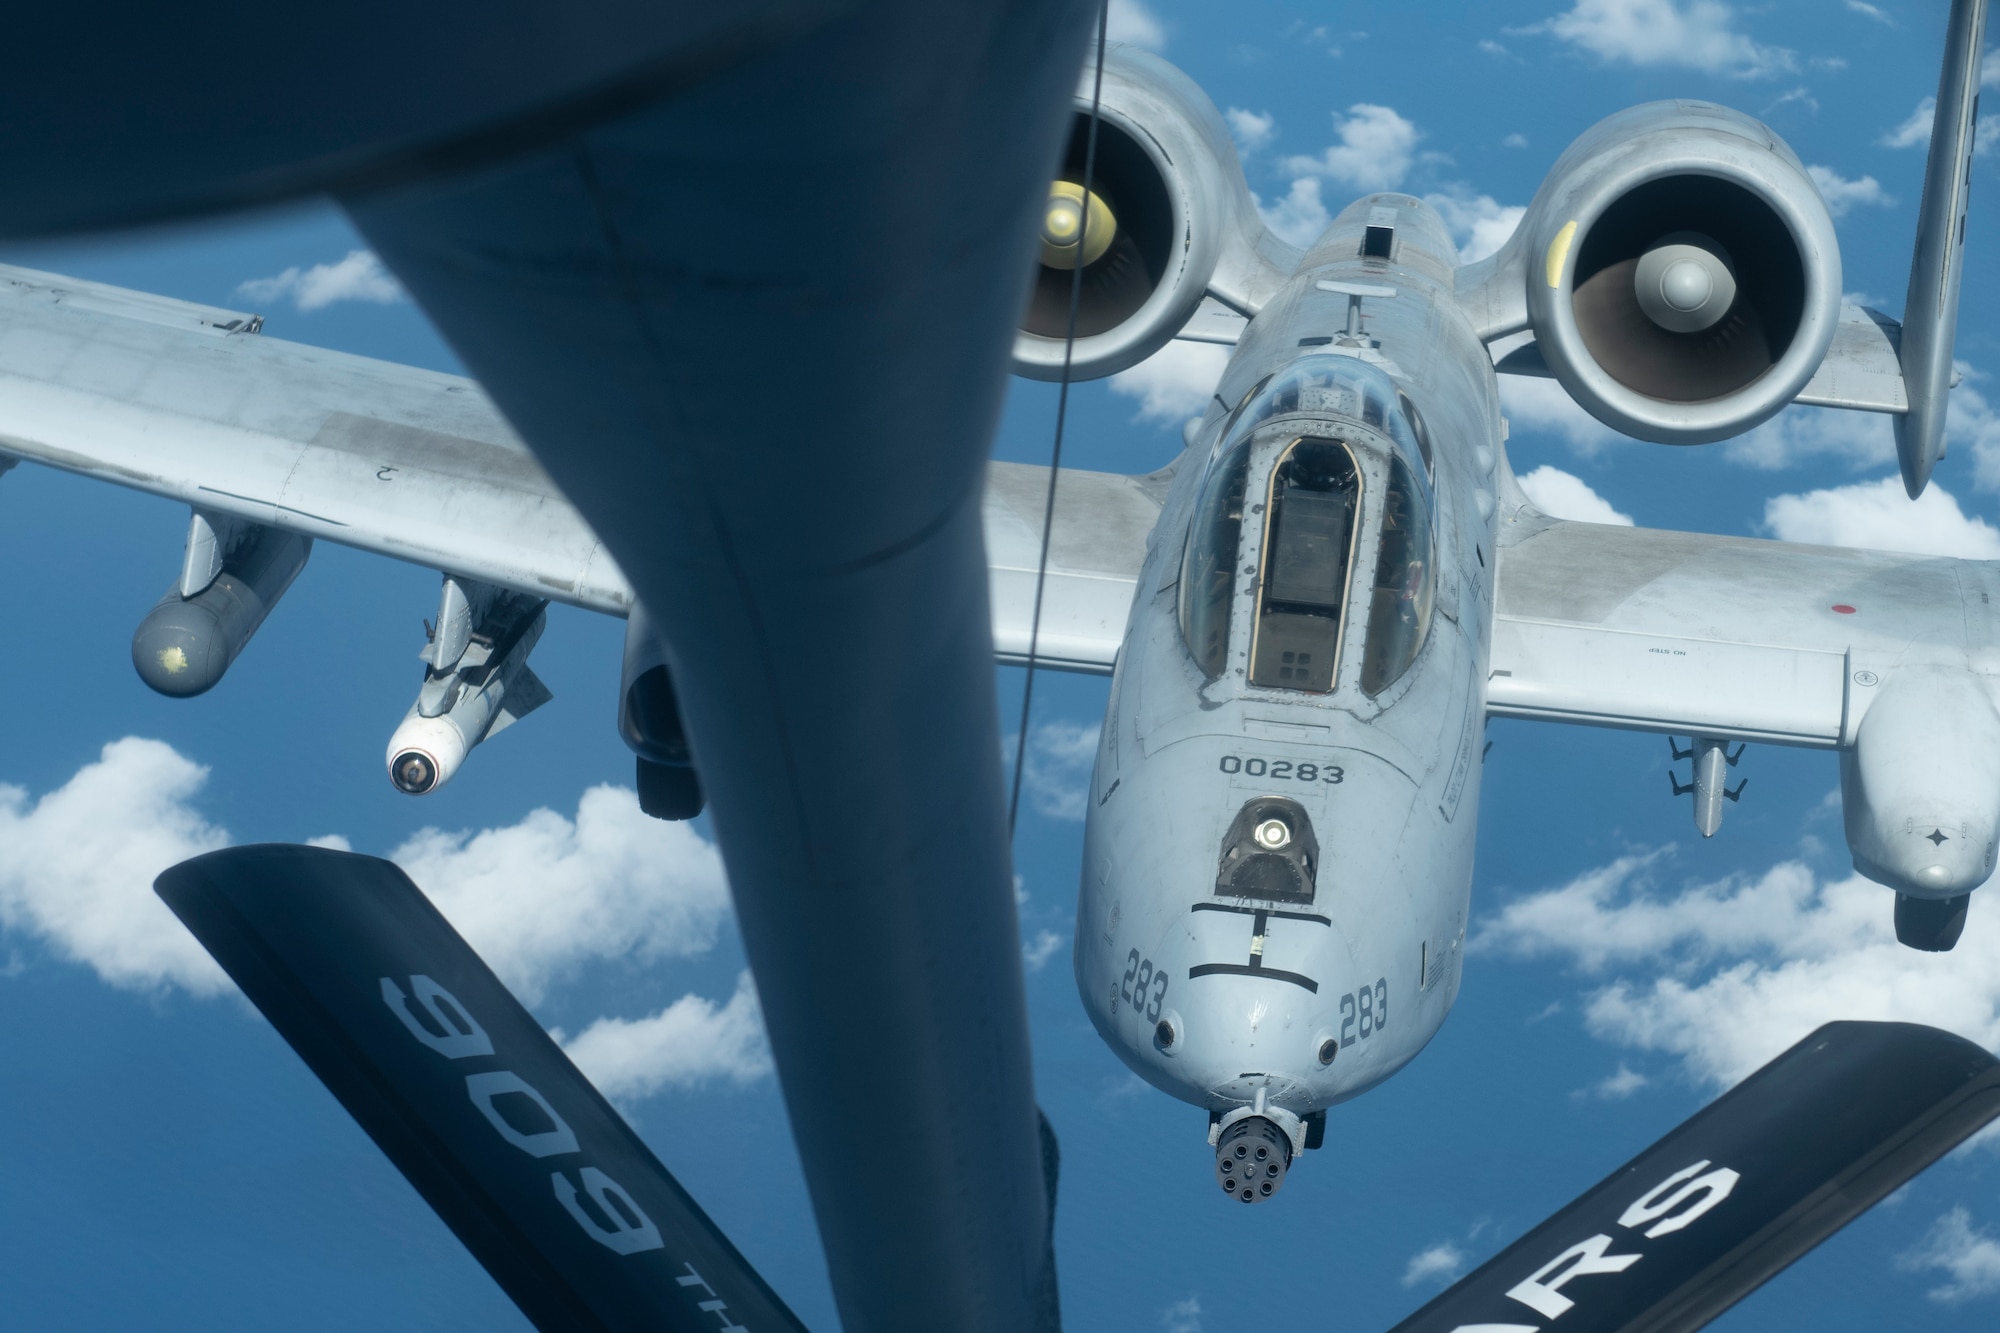 A U.S. Air Force A-10 Thunderbolt II from the 51st Fighter Squadron approaches a 909th Refueling Squadron KC-135 Stratotanker for aerial refueling over the Pacific Ocean Oct. 14, 2021. The A-10 was designed to target armored vehicles and tanks, and provide close air support for friendly ground troops. (U.S. Air Force photo by Senior Airman Jessi Monte)